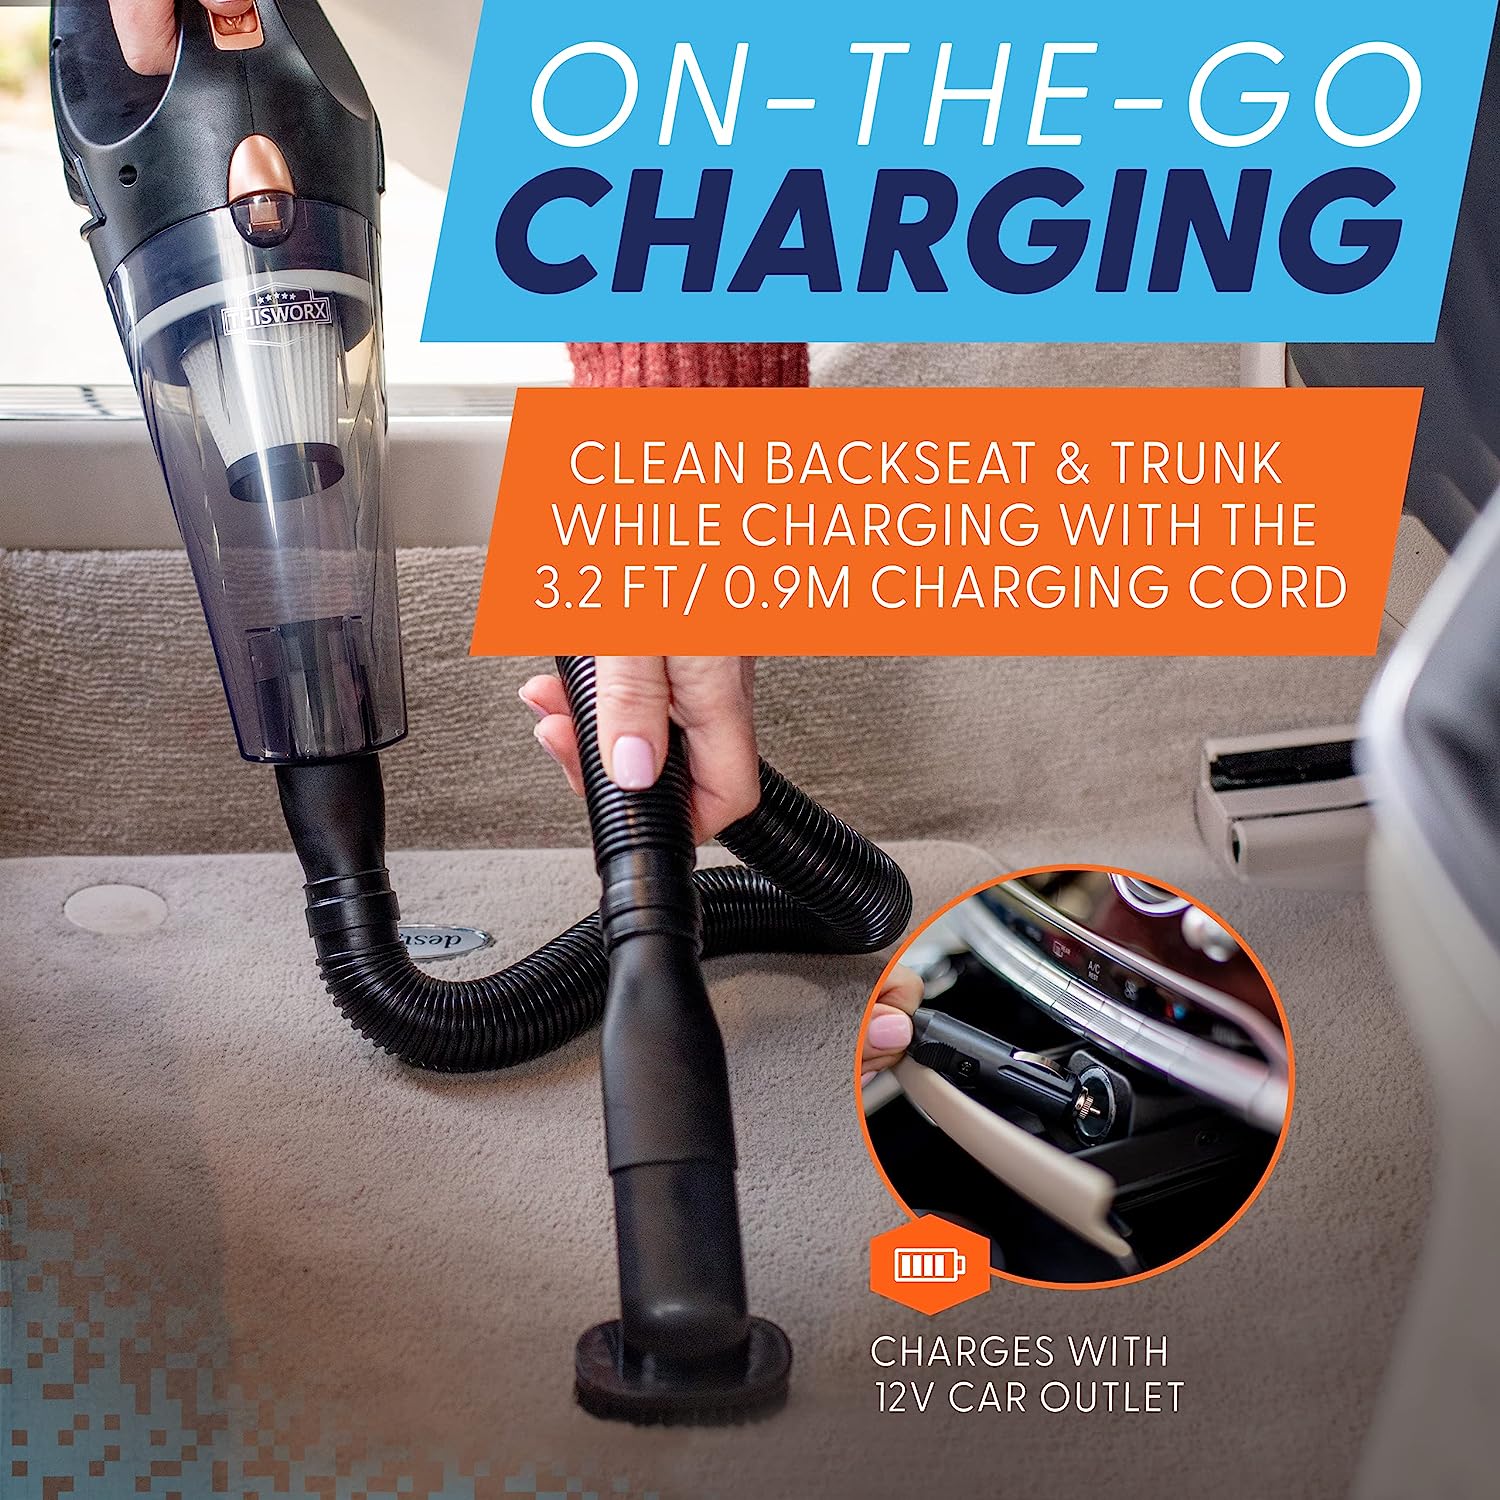 Thisworx Portable High Power Car Vacuum Cleaner With Led Light